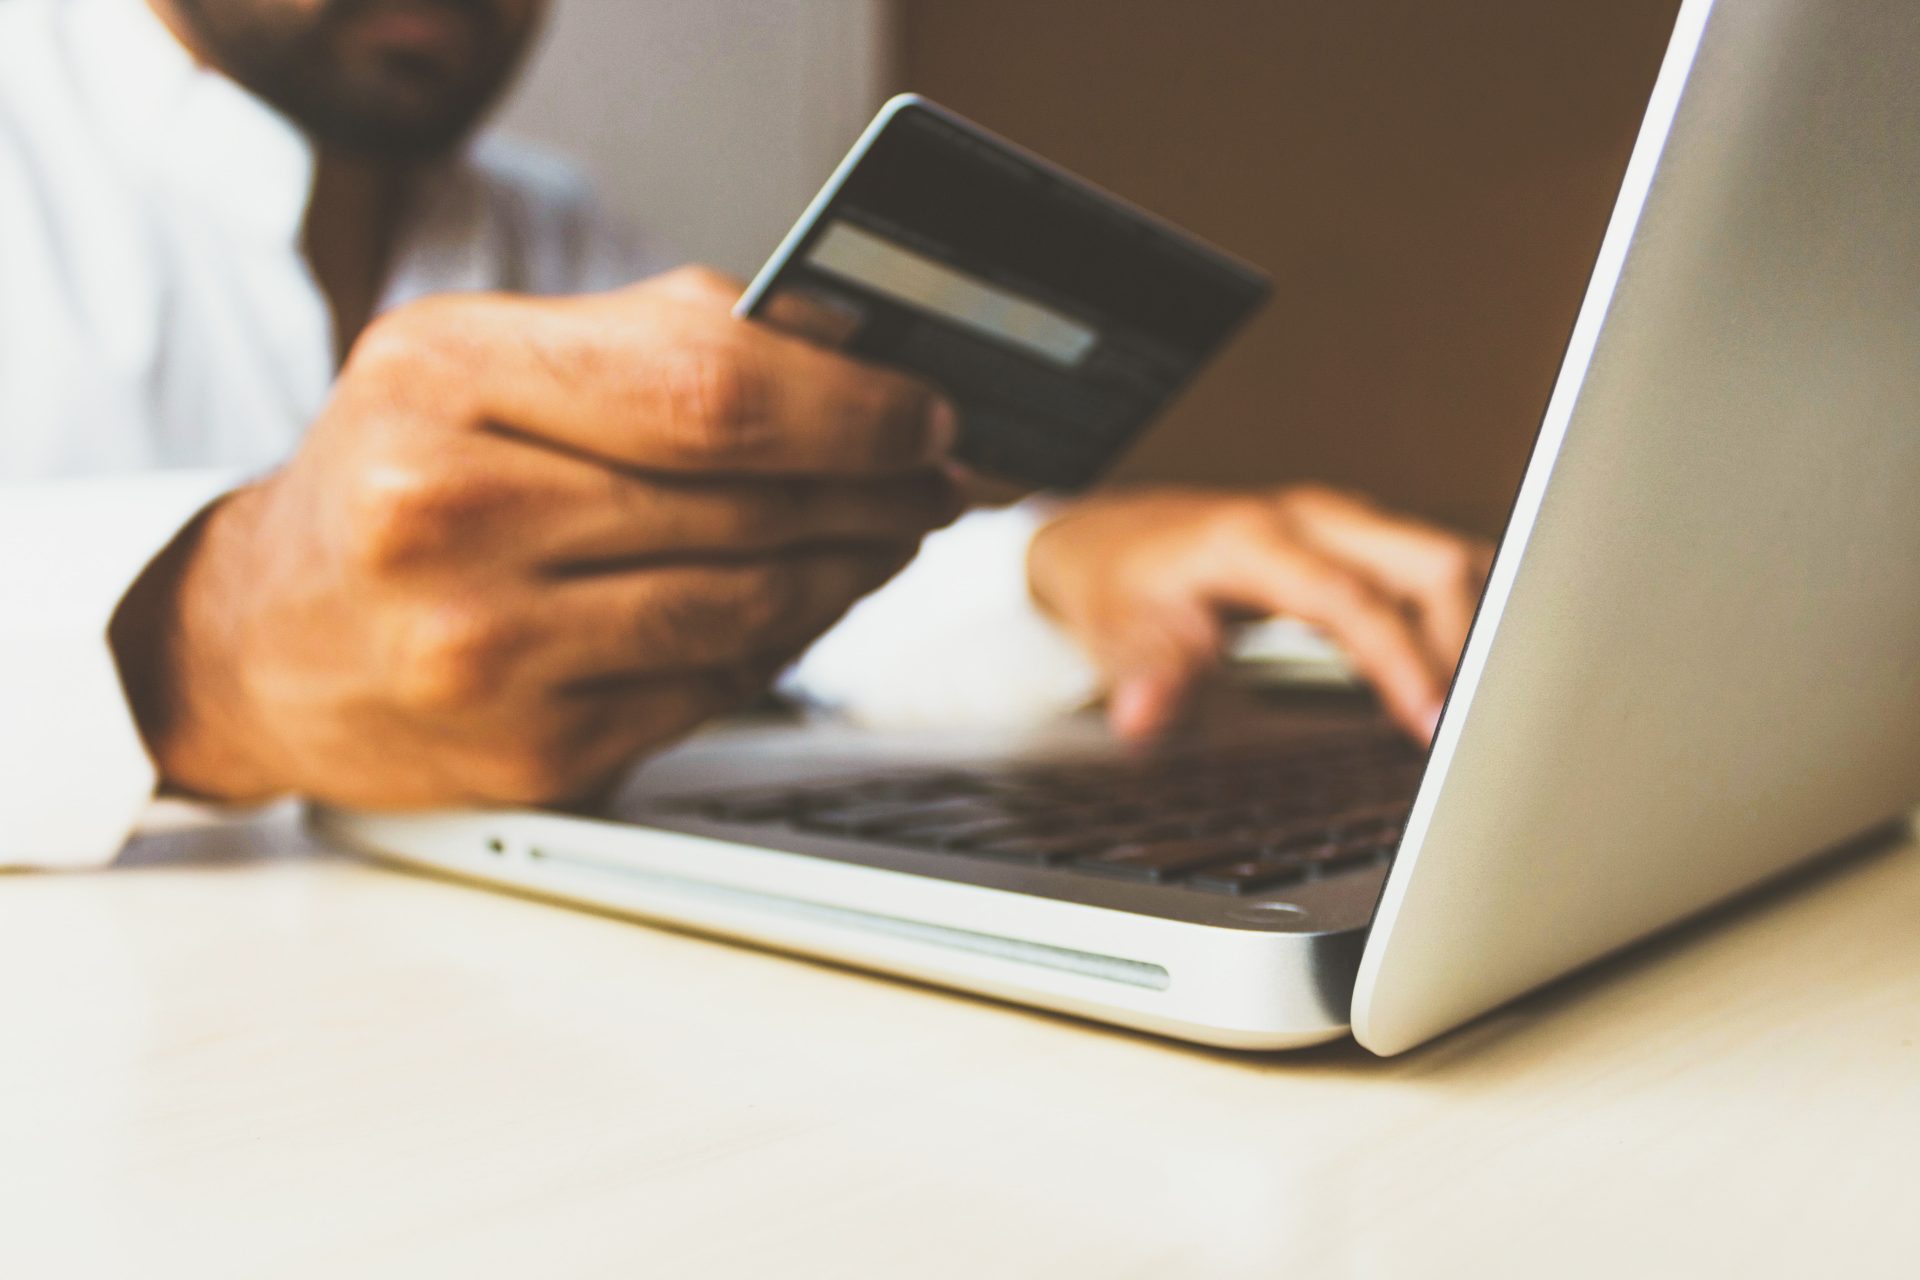 person making a purchase on their computer with their credit or debit card in hand with custom ecommerce written across the image